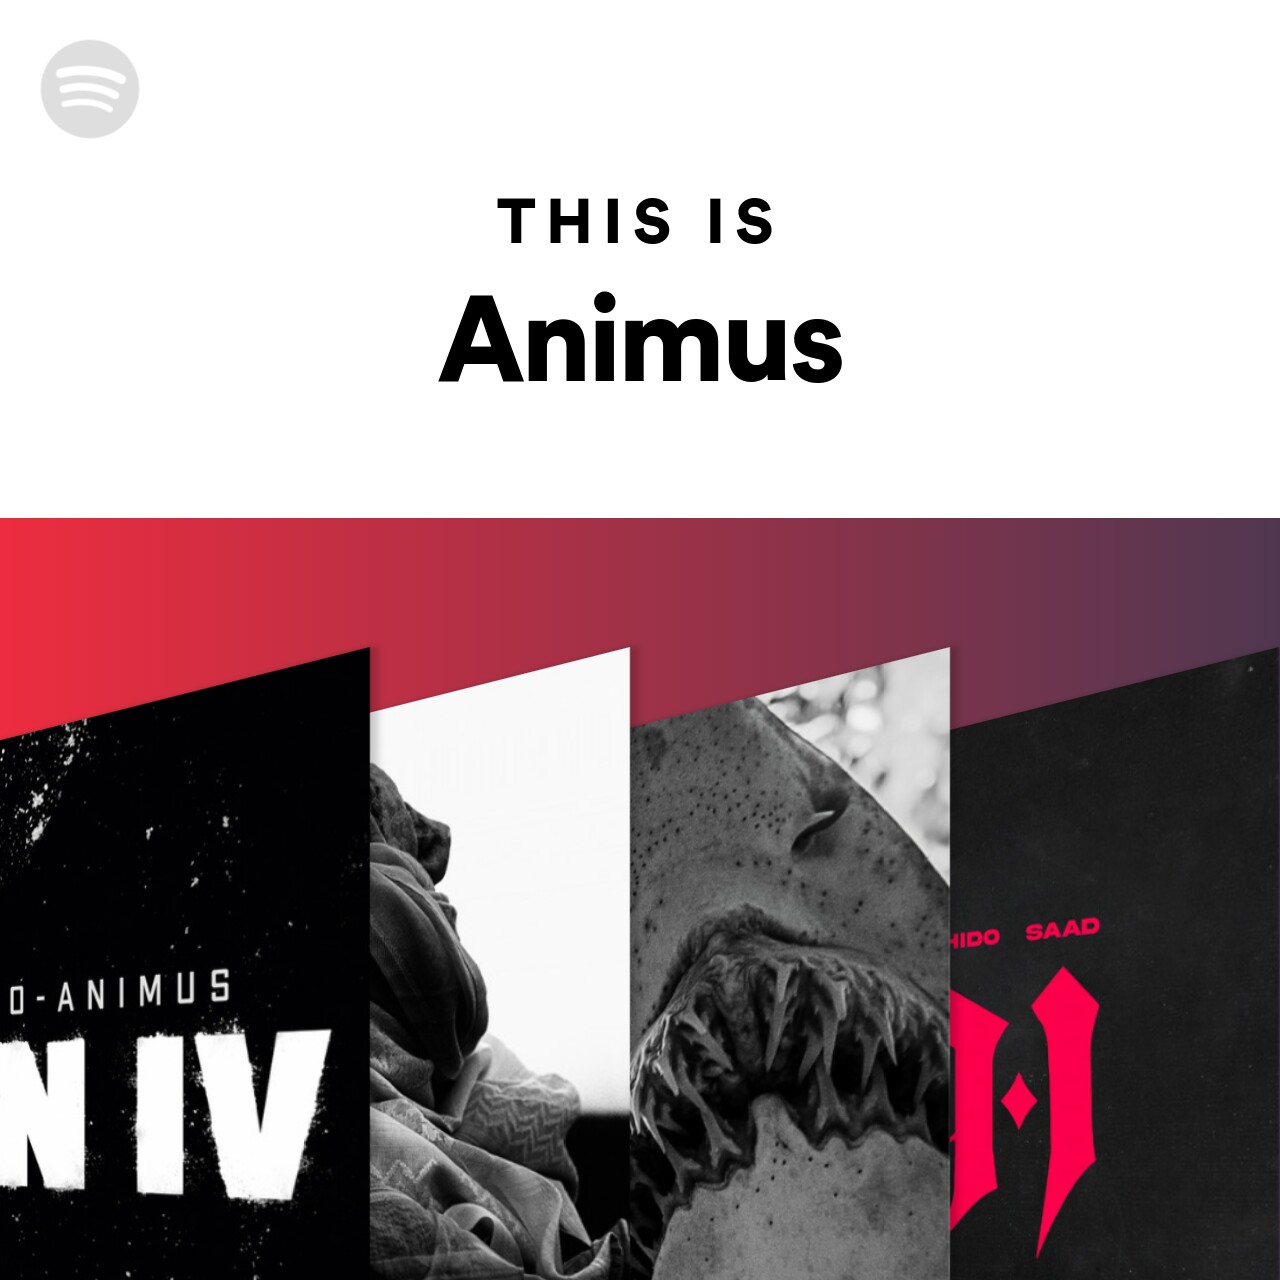 This Is Animus